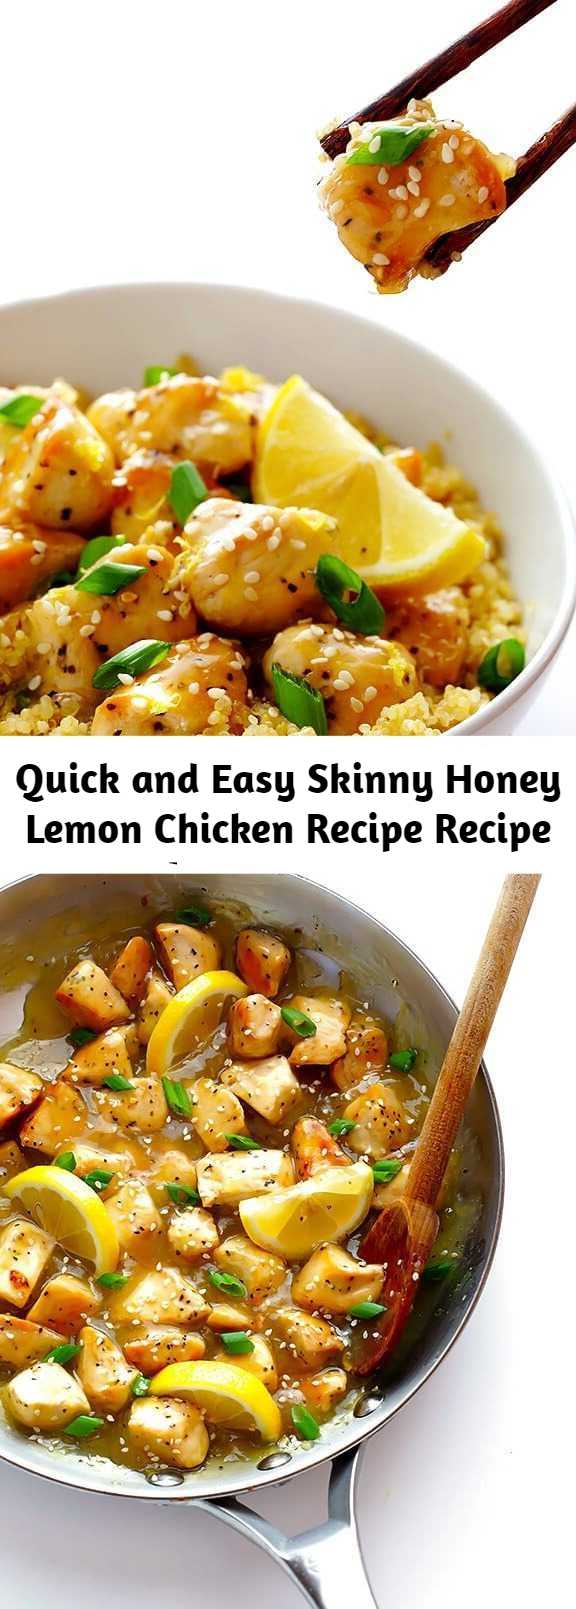 Quick and Easy Skinny Honey Lemon Chicken Recipe Recipe - This Skinny Honey Lemon Chicken recipe is quick and easy to make, made naturally lighter and gluten-free, and it’s absolutely delicious!